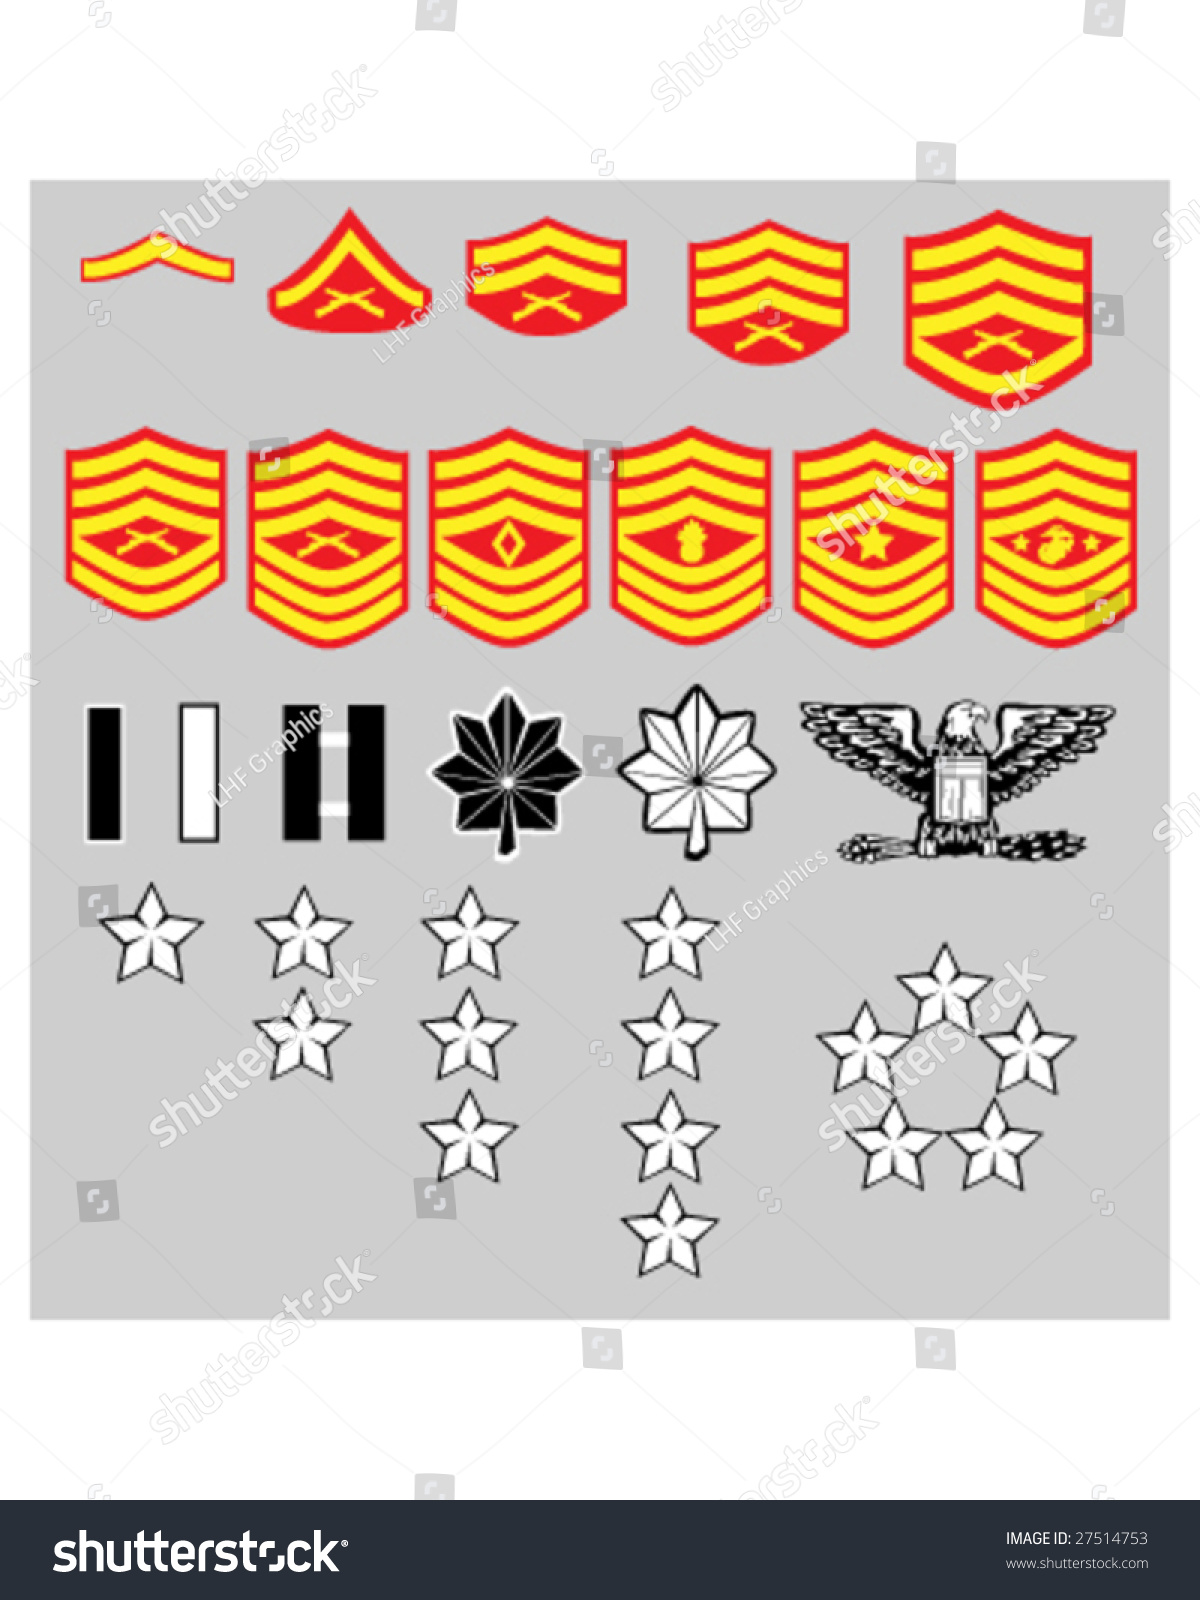 Marine Corps Ranks Enlisted And Officers